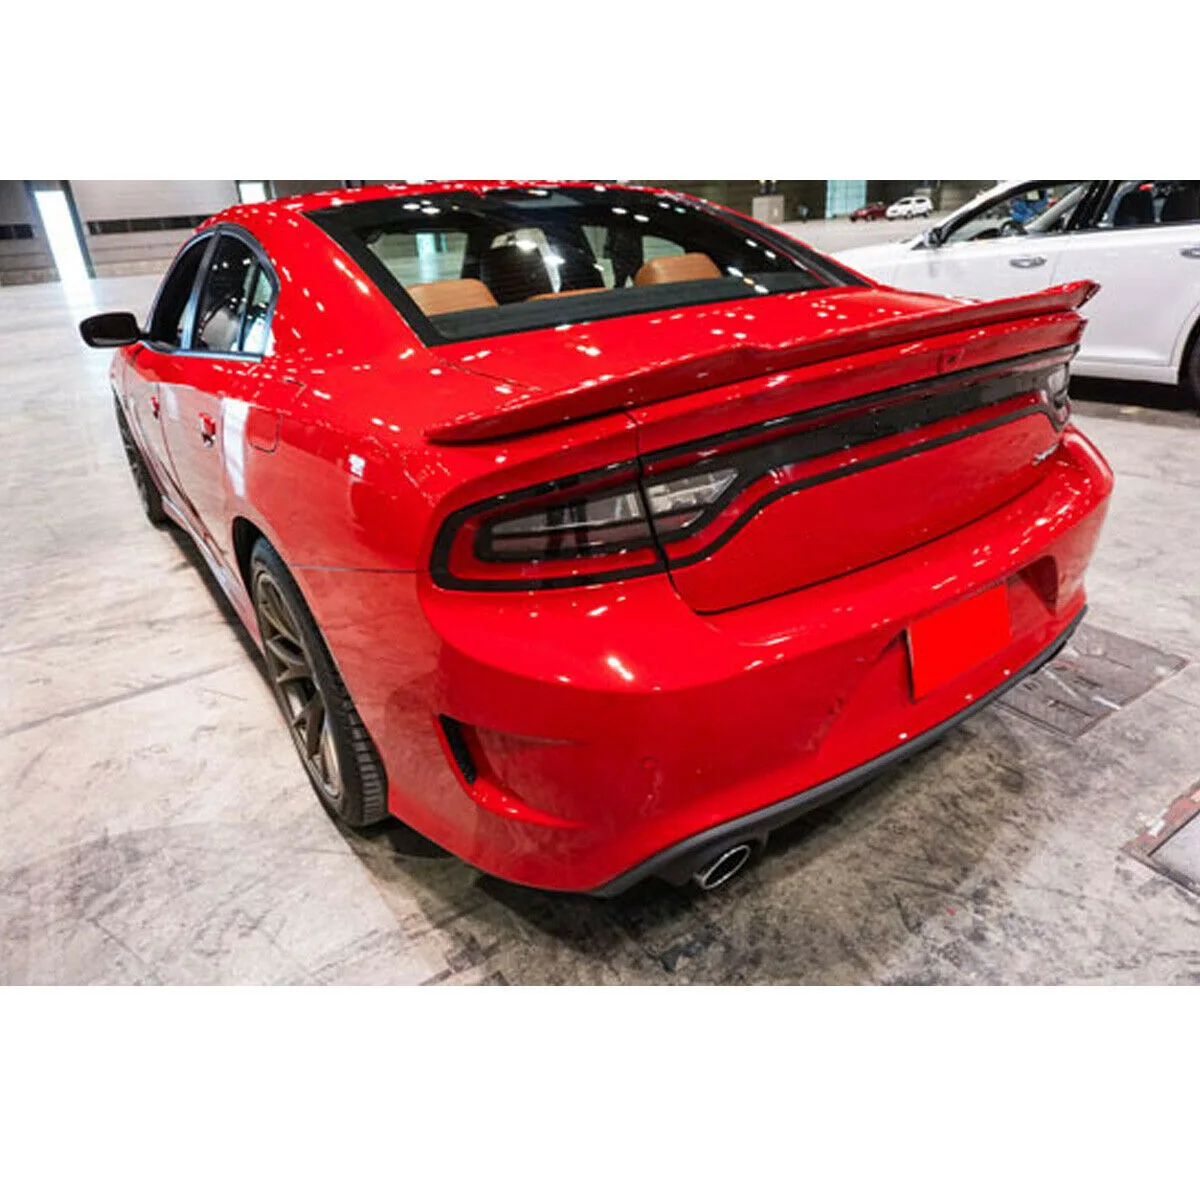 New Carbon Fiber Look /black Car Rear Roof Spoiler Wing Trunk Spoiler Wing  Lip For Dodge Charger Srt Sxt R/t Pursuit 2015-2019 - Buy Wing Product on  